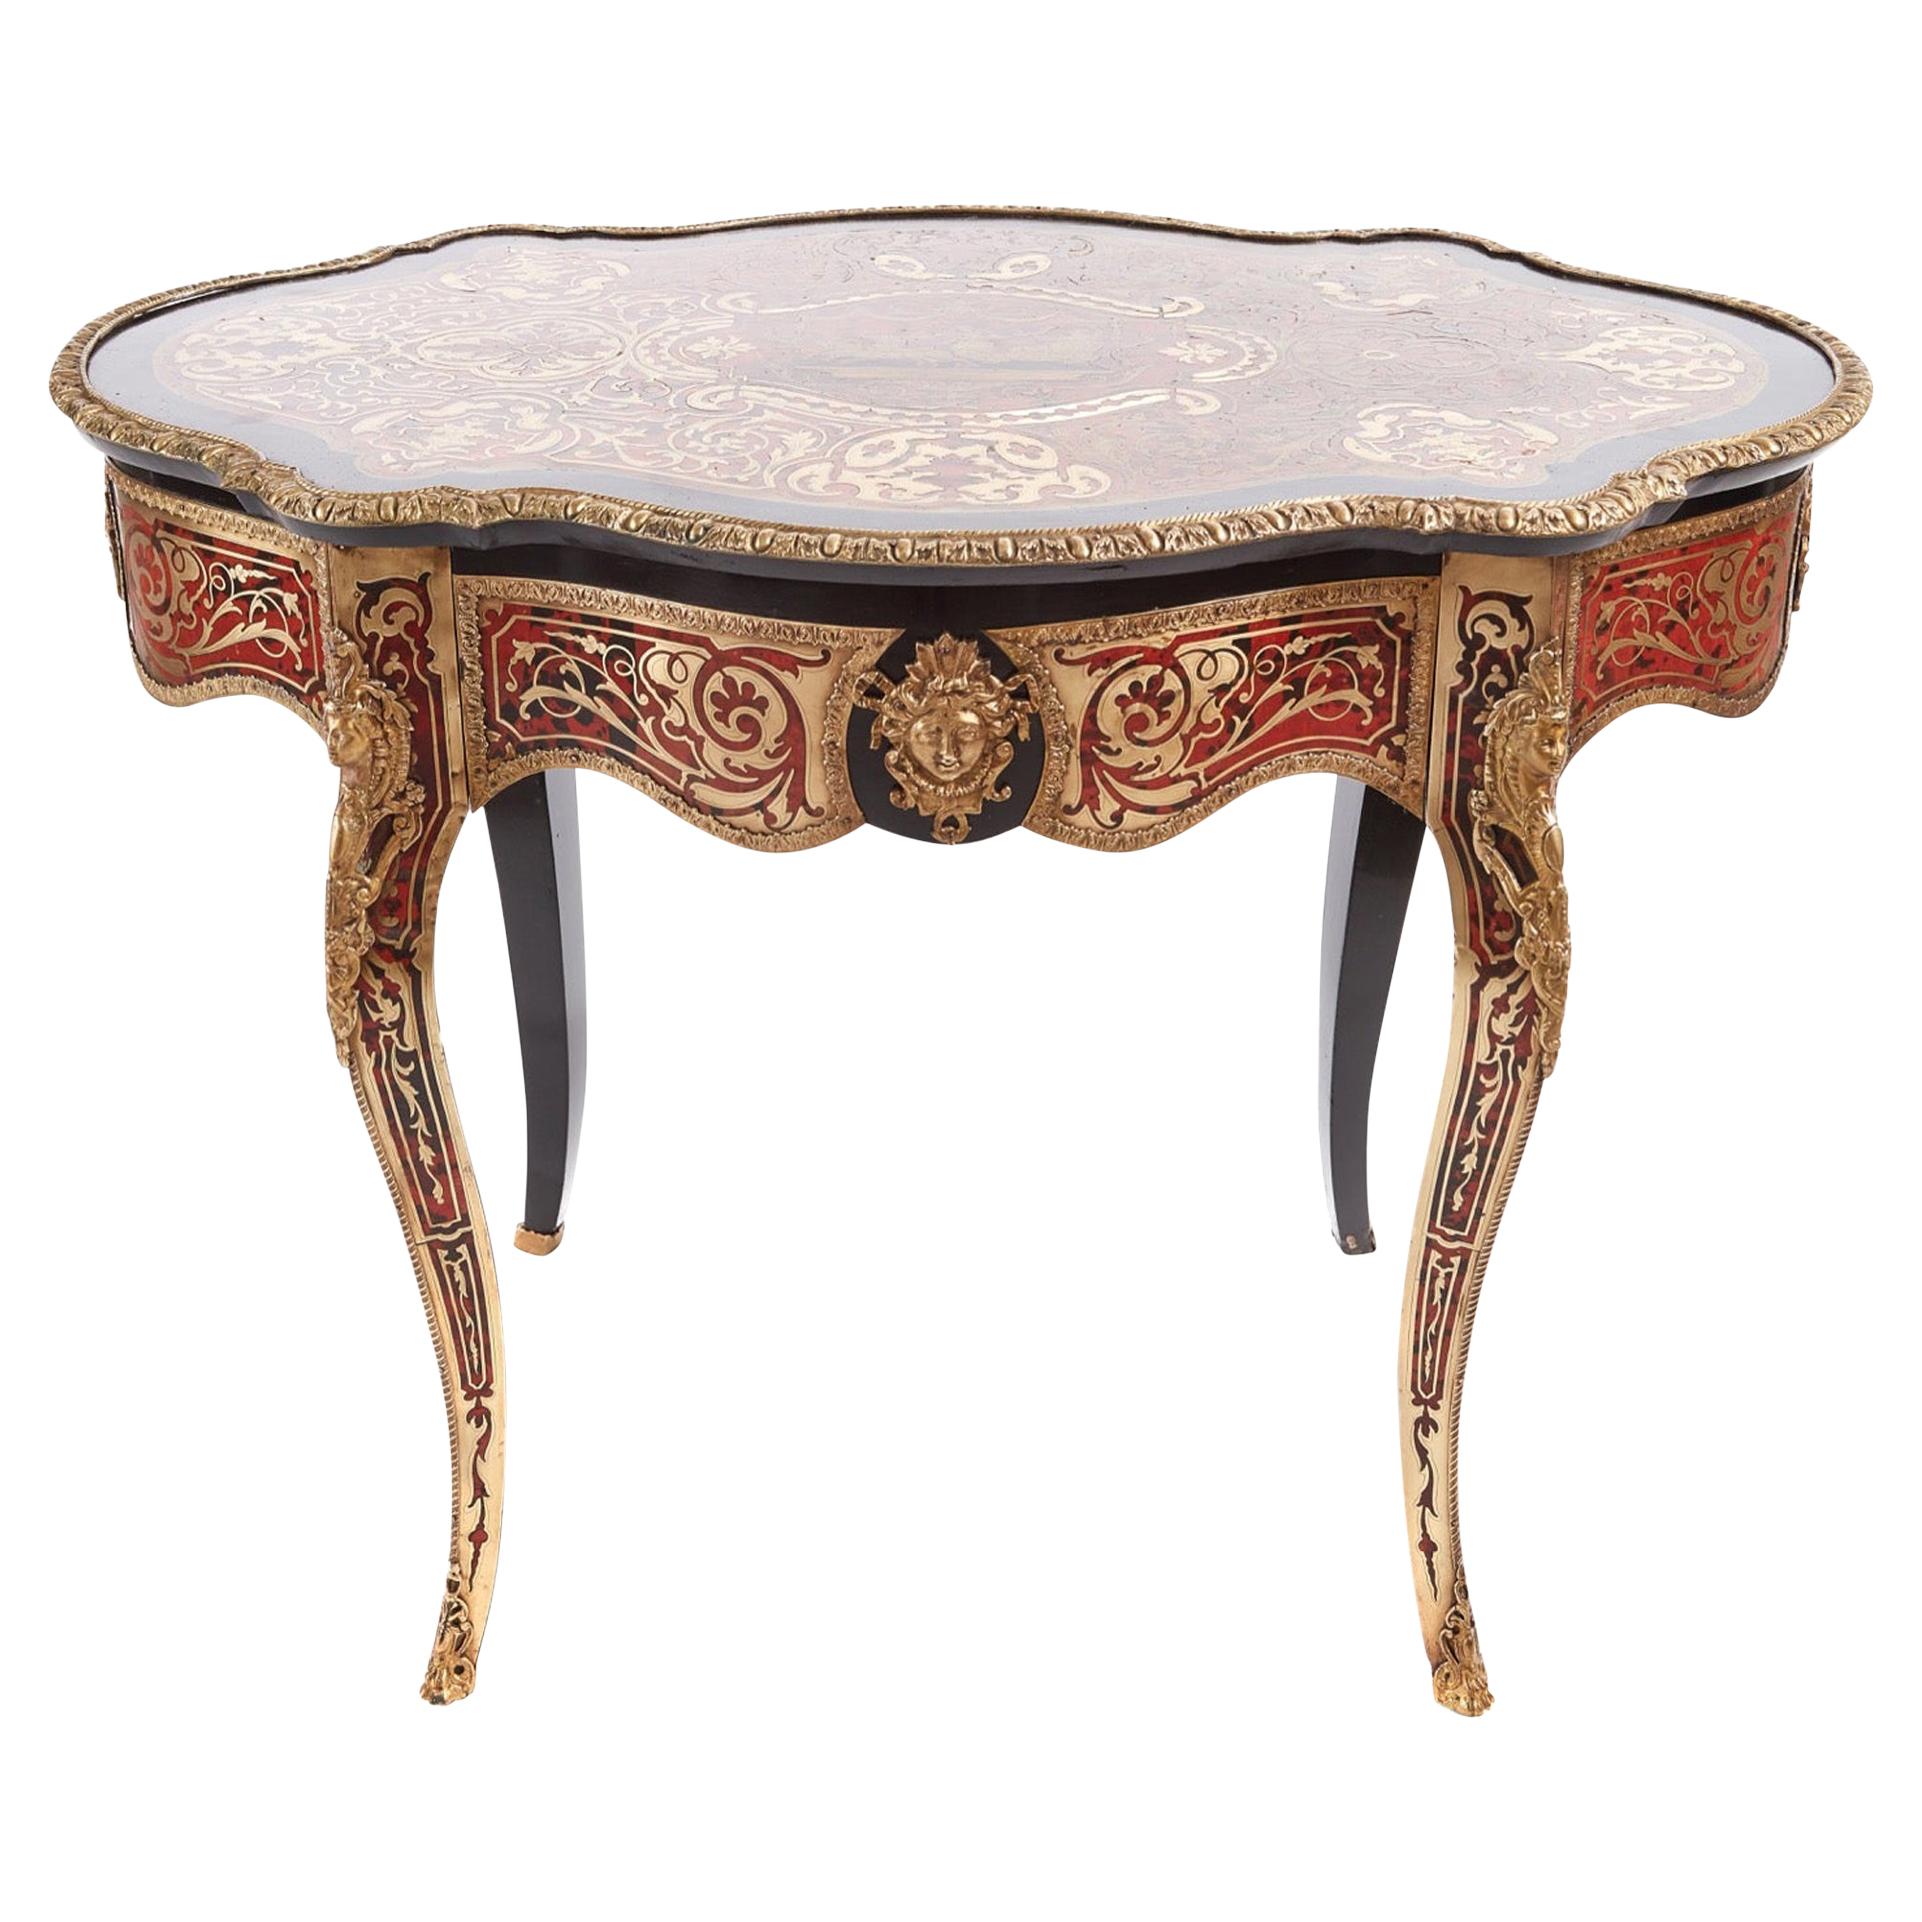 Antique 19th Century French Boulle Centre Table, circa 1860